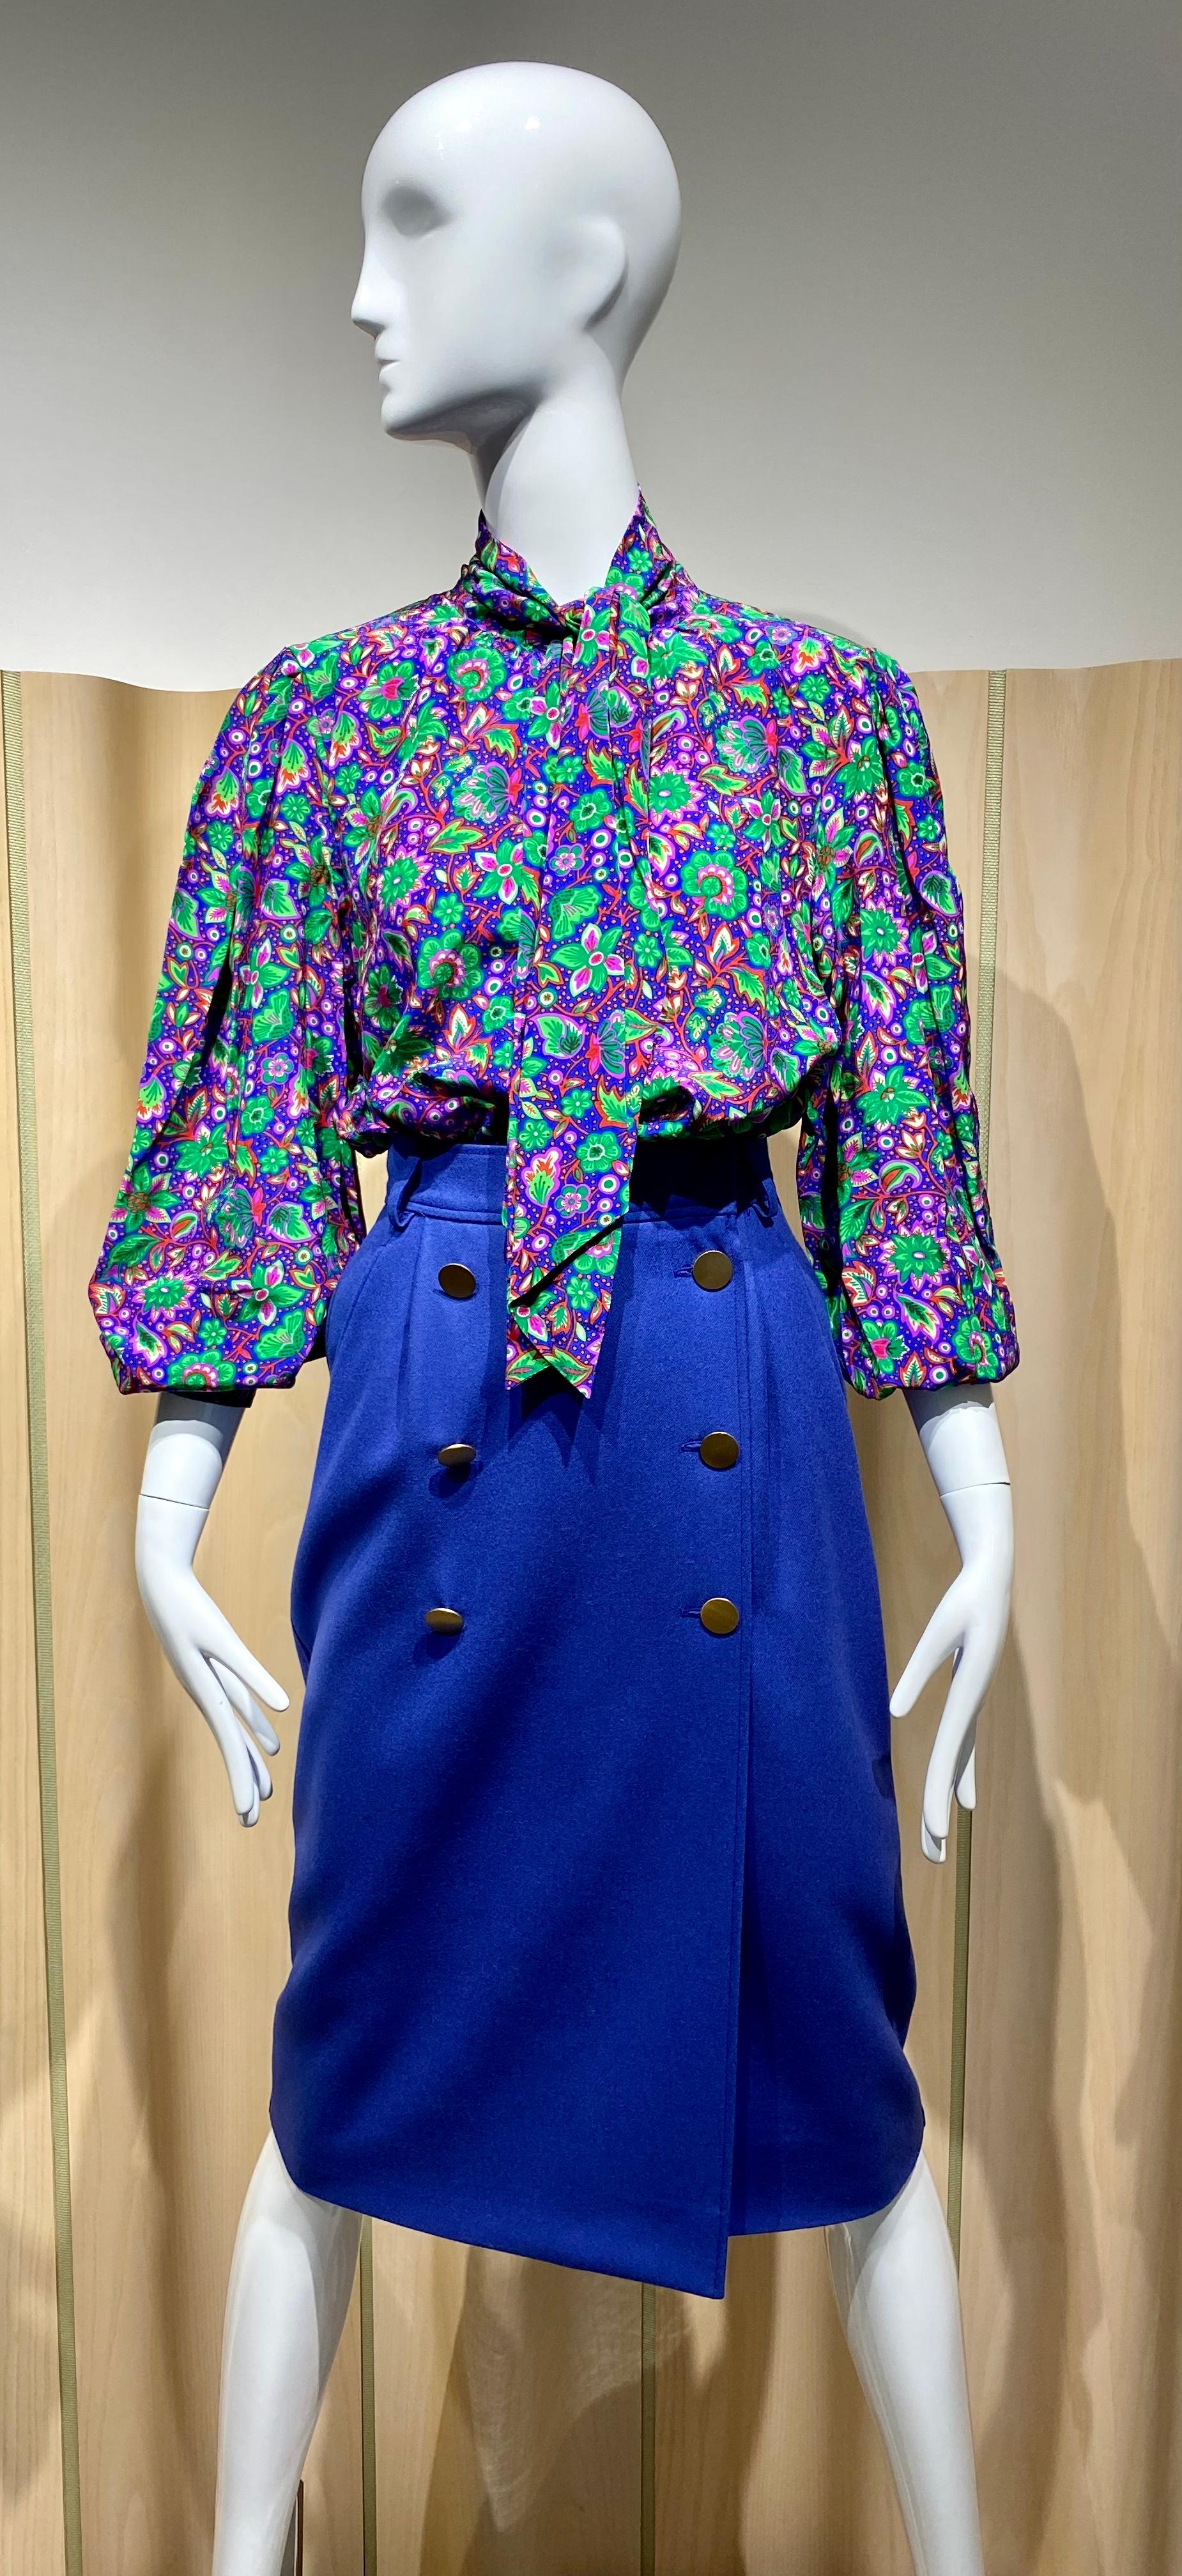 Vintage Yves Saint Laurent rive gauche blue, purple and green floral print long sleeve blouse.
Label marked size 40
